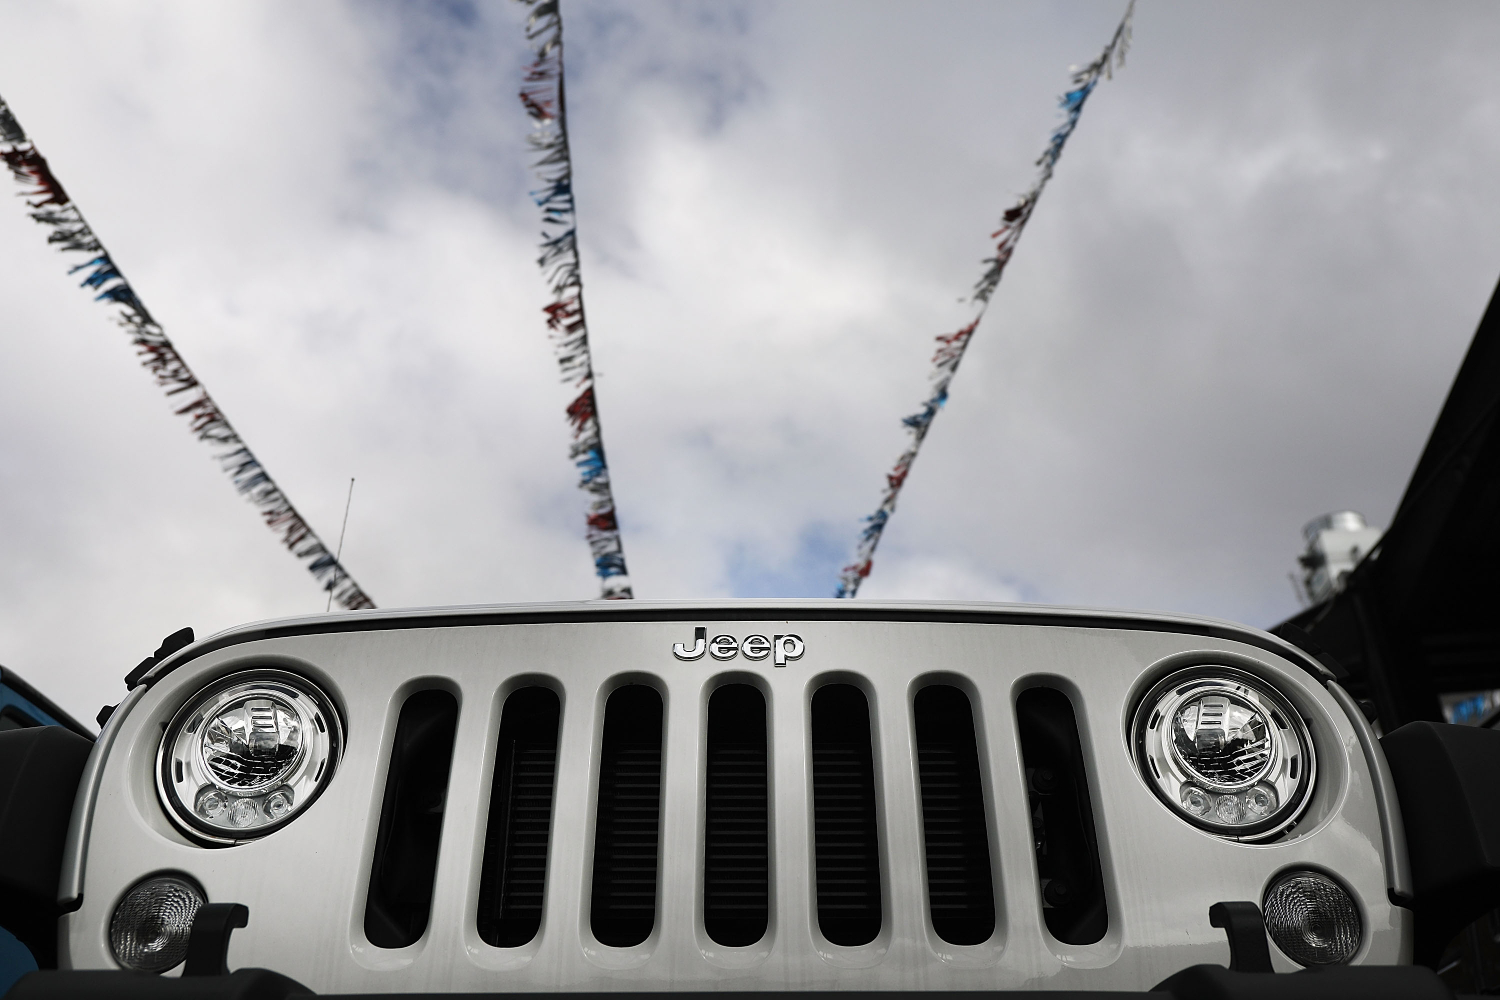 Jeep Named Most Patriotic Automaker, seen here with a Jeep Wrangler SUV